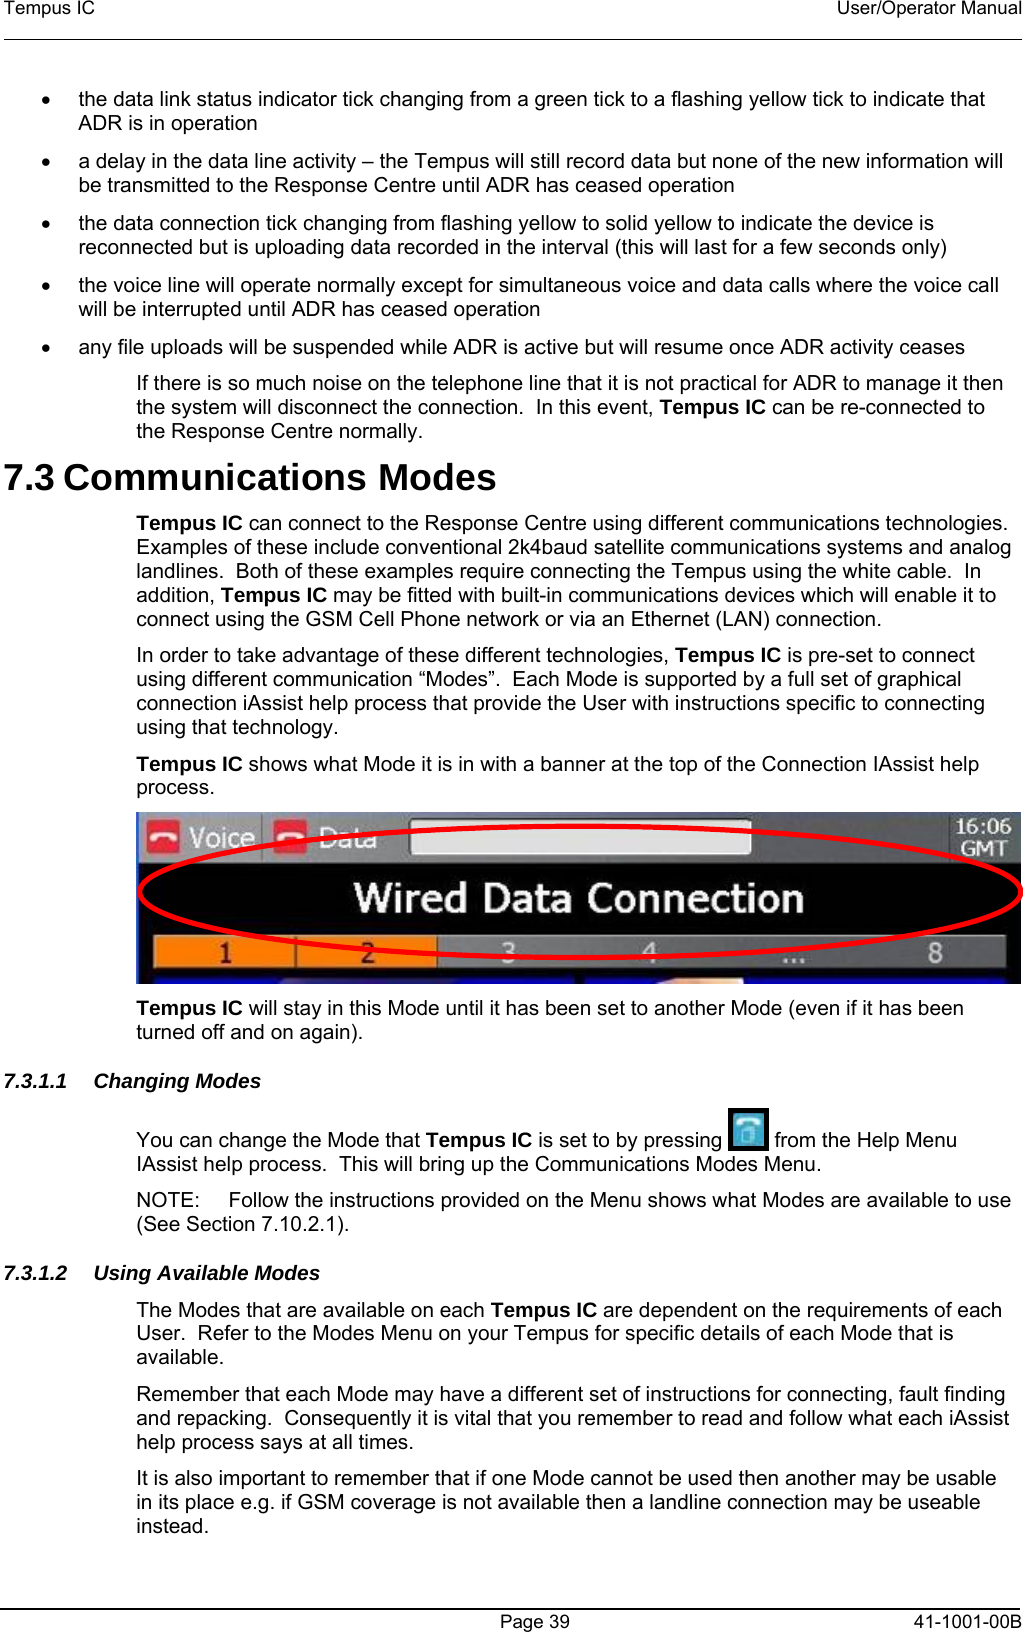 Tempus IC    User/Operator Manual      Page 39   41-1001-00B •  the da een tick to a flashing yellow tick to indicate that •  e activity – the Tempus will still record data but none of the new information will • dicate the device is  •  call • sume once ADR activity ceases  en 7.3 Com es  Centre using different communications technologies.   connect  Mode it is in with a banner at the top of the Connection IAssist help ta link status indicator tick changing from a grADR is in operation a delay in the data linbe transmitted to the Response Centre until ADR has ceased operation  the data connection tick changing from flashing yellow to solid yellow to inreconnected but is uploading data recorded in the interval (this will last for a few seconds only)the voice line will operate normally except for simultaneous voice and data calls where the voicewill be interrupted until ADR has ceased operation any file uploads will be suspended while ADR is active but will reIf there is so much noise on the telephone line that it is not practical for ADR to manage it ththe system will disconnect the connection.  In this event, Tempus IC can be re-connected to the Response Centre normally. munications ModTempus IC can connect to the ResponseExamples of these include conventional 2k4baud satellite communications systems and analog landlines.  Both of these examples require connecting the Tempus using the white cable.  In addition, Tempus IC may be fitted with built-in communications devices which will enable it to connect using the GSM Cell Phone network or via an Ethernet (LAN) connection. In order to take advantage of these different technologies, Tempus IC is pre-set tousing different communication “Modes”.  Each Mode is supported by a full set of graphical connection iAssist help process that provide the User with instructions specific to connectingusing that technology.   Tempus IC shows what process.  Tempus IC will stay in this Mode until it has been set to another Mode (even if it has been 7.3.1.1 ChaYou can change the Mode that Tempus IC is set to by pressing turned off and on again). nging Modes  from the Help Menu es re available to use 7.3.1.2  Usinailable on each Tempus IC are dependent on the requirements of each  that each Mode may have a different set of instructions for connecting, fault finding  that if one Mode cannot be used then another may be usable IAssist help process.  This will bring up the Communications Mod Menu.   NOTE:  Follow the instructions provided on the Menu shows what Modes a(See Section 7.10.2.1). g Available Modes  The Modes that are avUser.  Refer to the Modes Menu on your Tempus for specific details of each Mode that is available. Rememberand repacking.  Consequently it is vital that you remember to read and follow what each iAssist help process says at all times. It is also important to rememberin its place e.g. if GSM coverage is not available then a landline connection may be useable instead. 